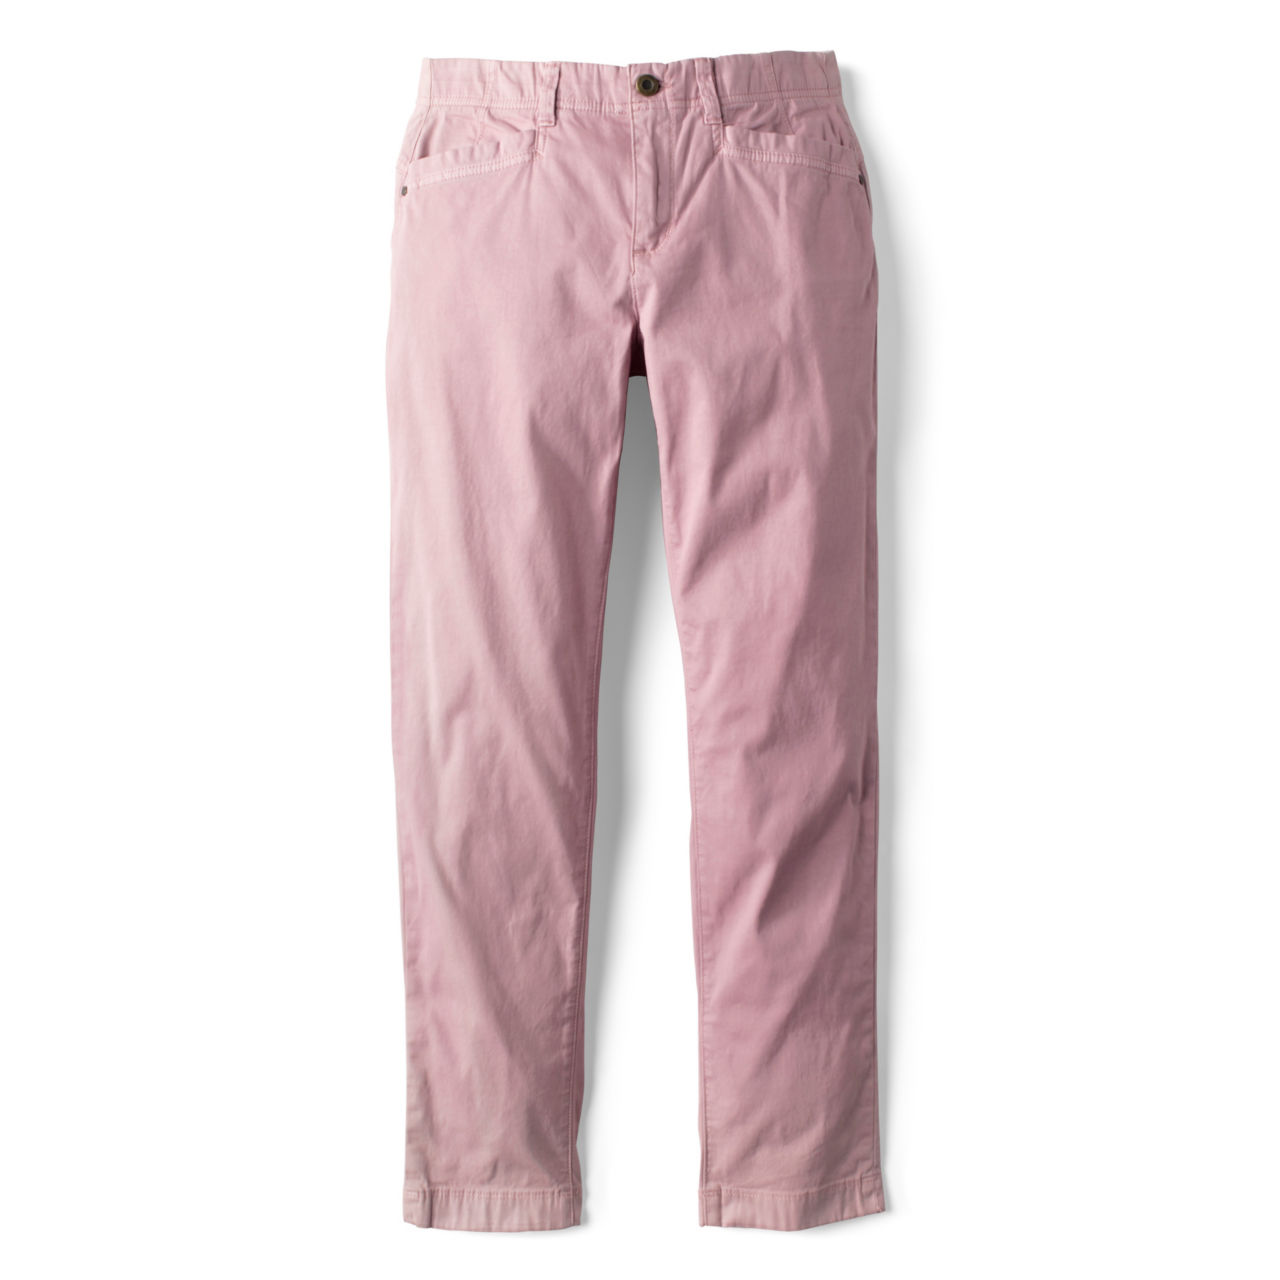 Everyday Chino Natural Fit Straight-Leg Ankle Pants -  image number 5